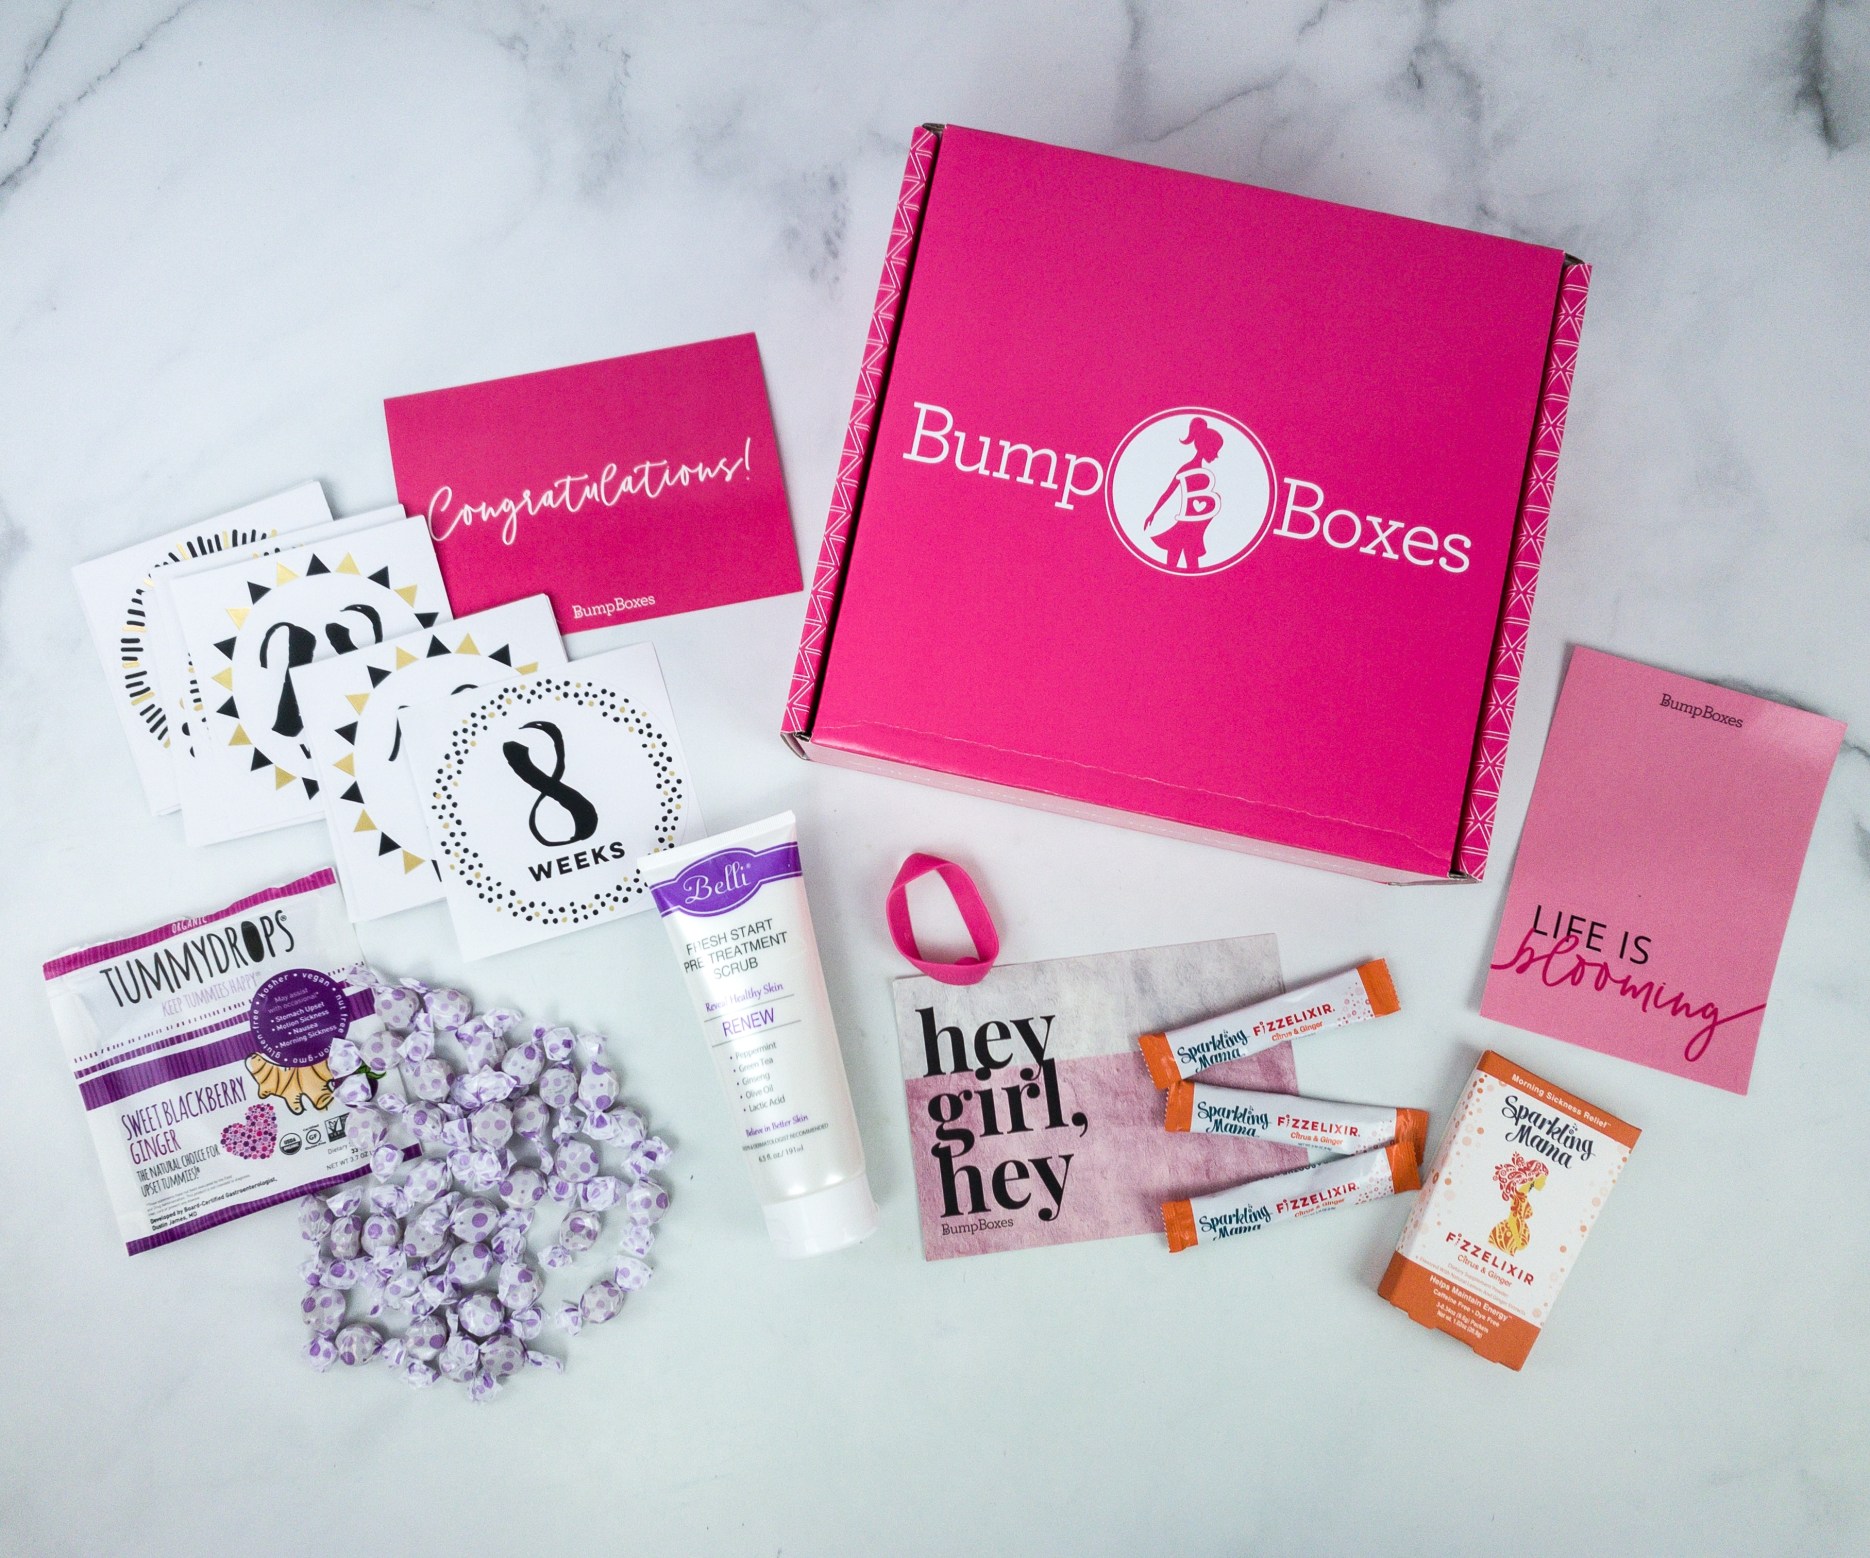 Bump Boxes Reviews Get All The Details At Hello Subscription!